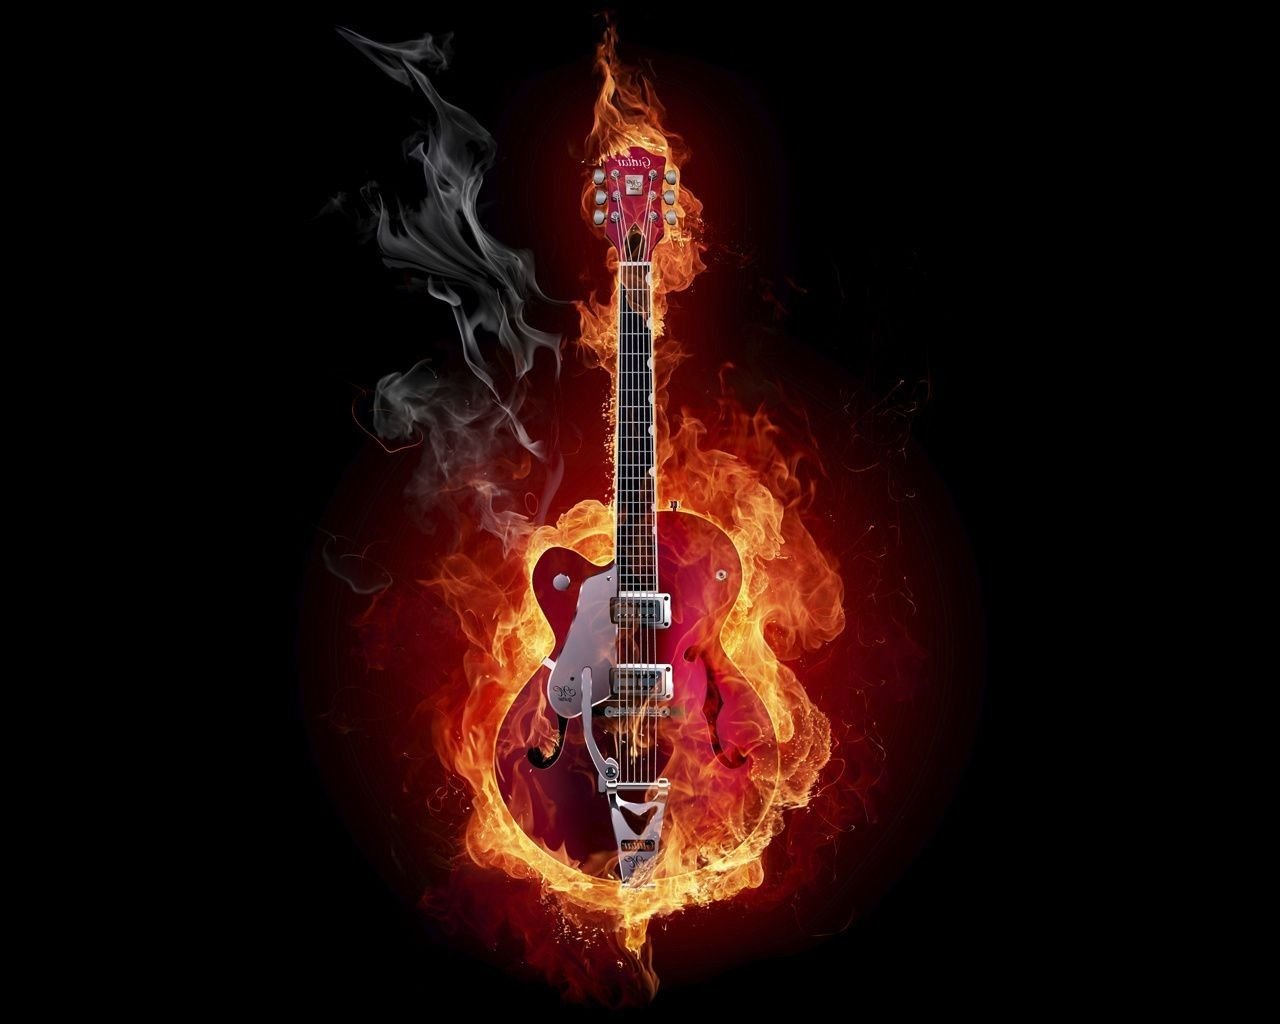 The phone background image Fiery guitar on a black background photohop